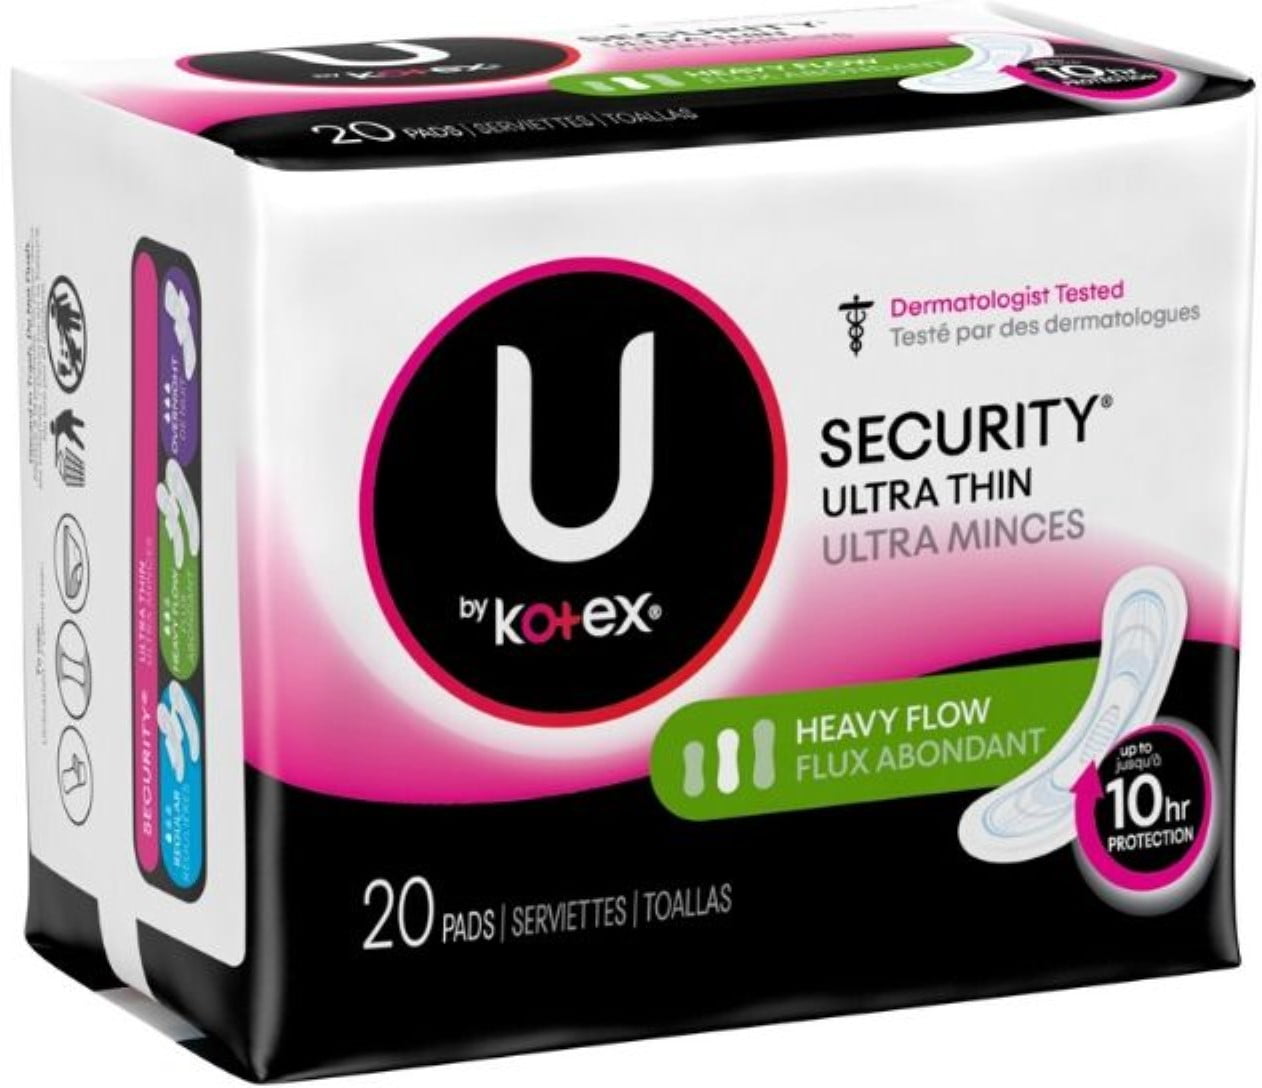 U by Kotex launches 2 new products